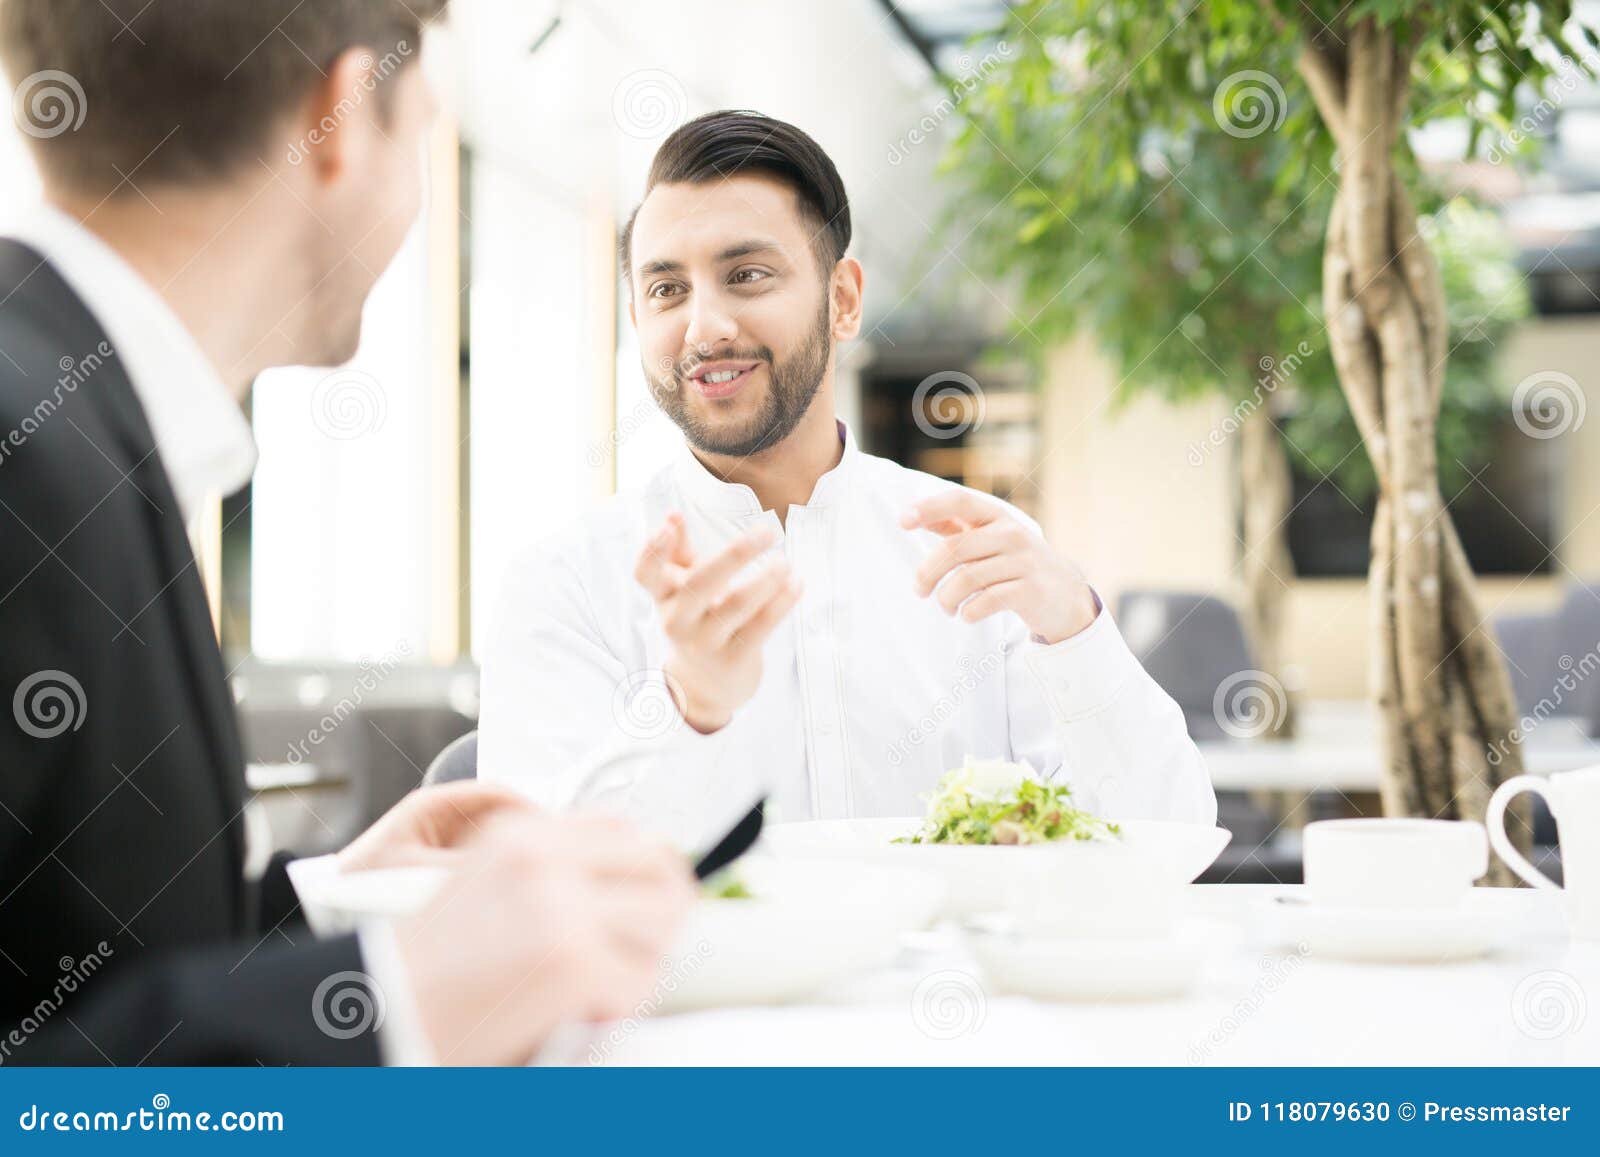 Lunch of businessmen stock photo. Image of business - 118079630